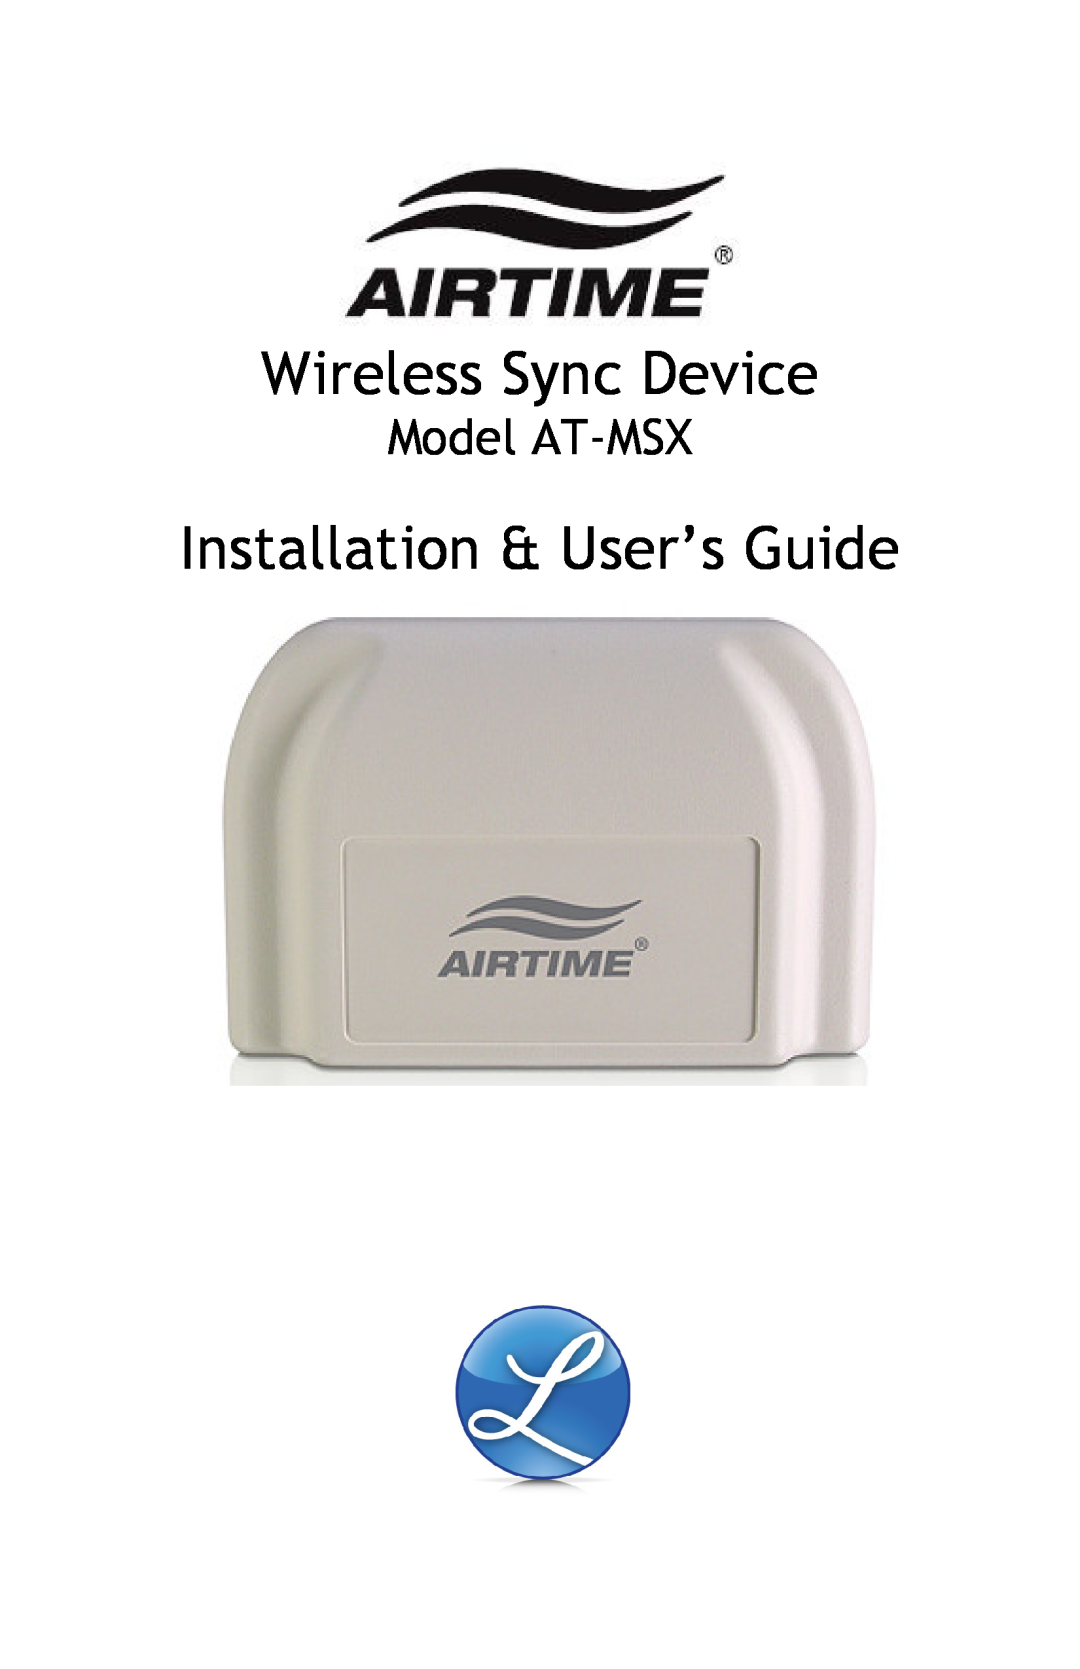 Lathem manual Wireless Sync Device, Installation & User’s Guide, Model AT-MSX 